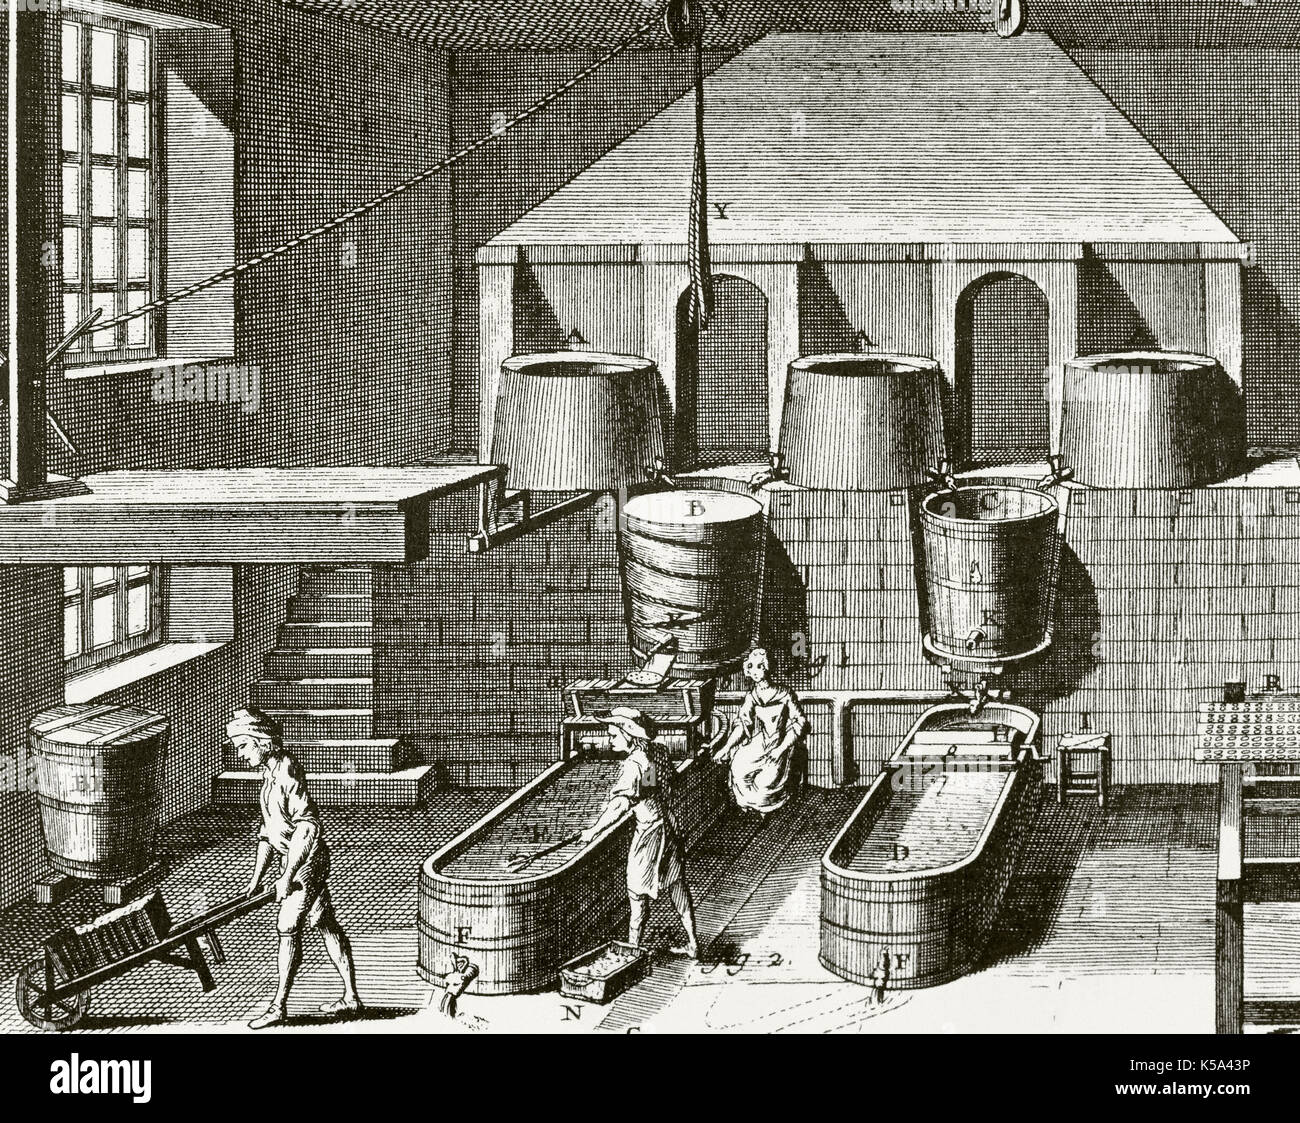 Industrial Revolution. Interior of a workshop of candles from the mid-eigtheenth century, during the process of bleaching the candles. Illustration of the 18th century from the Encyclopedie Diderot et d'Alembert. Stock Photo